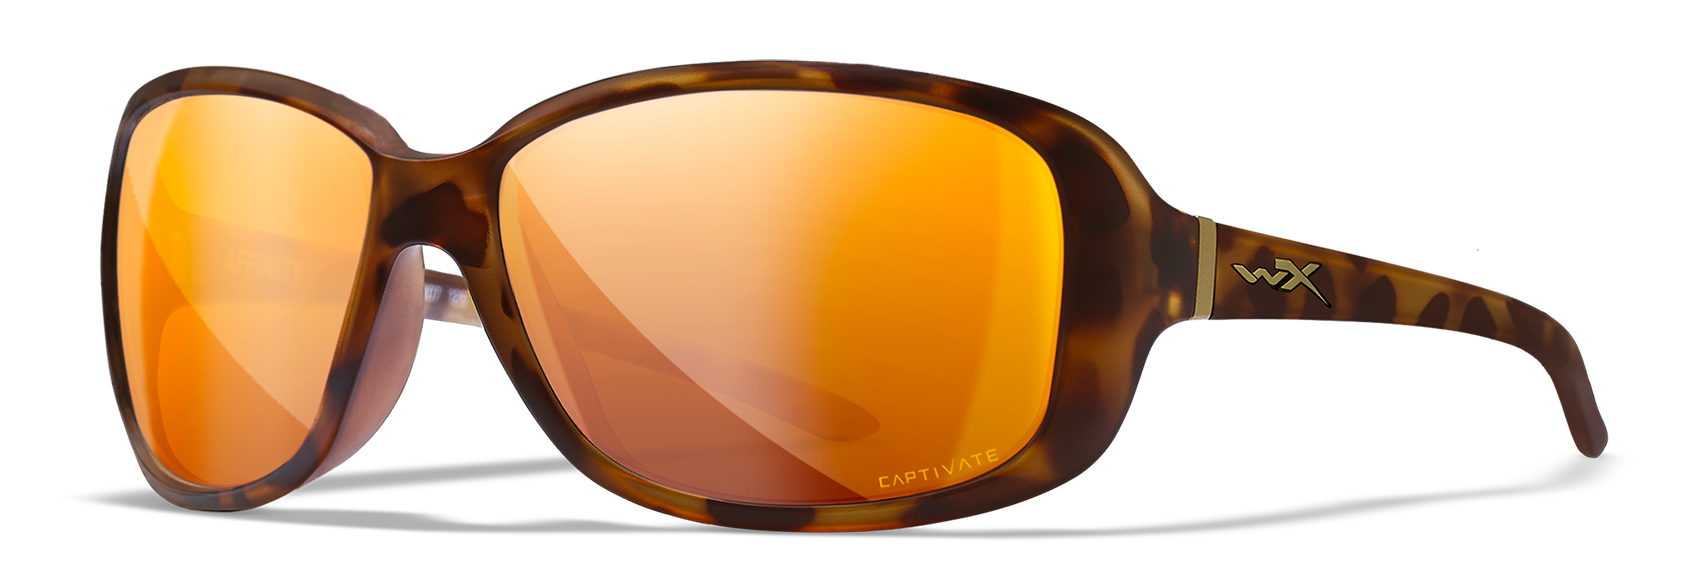 Wiley X WX AFFINITY Oval Sunglasses  Matte Demi 61-14-125